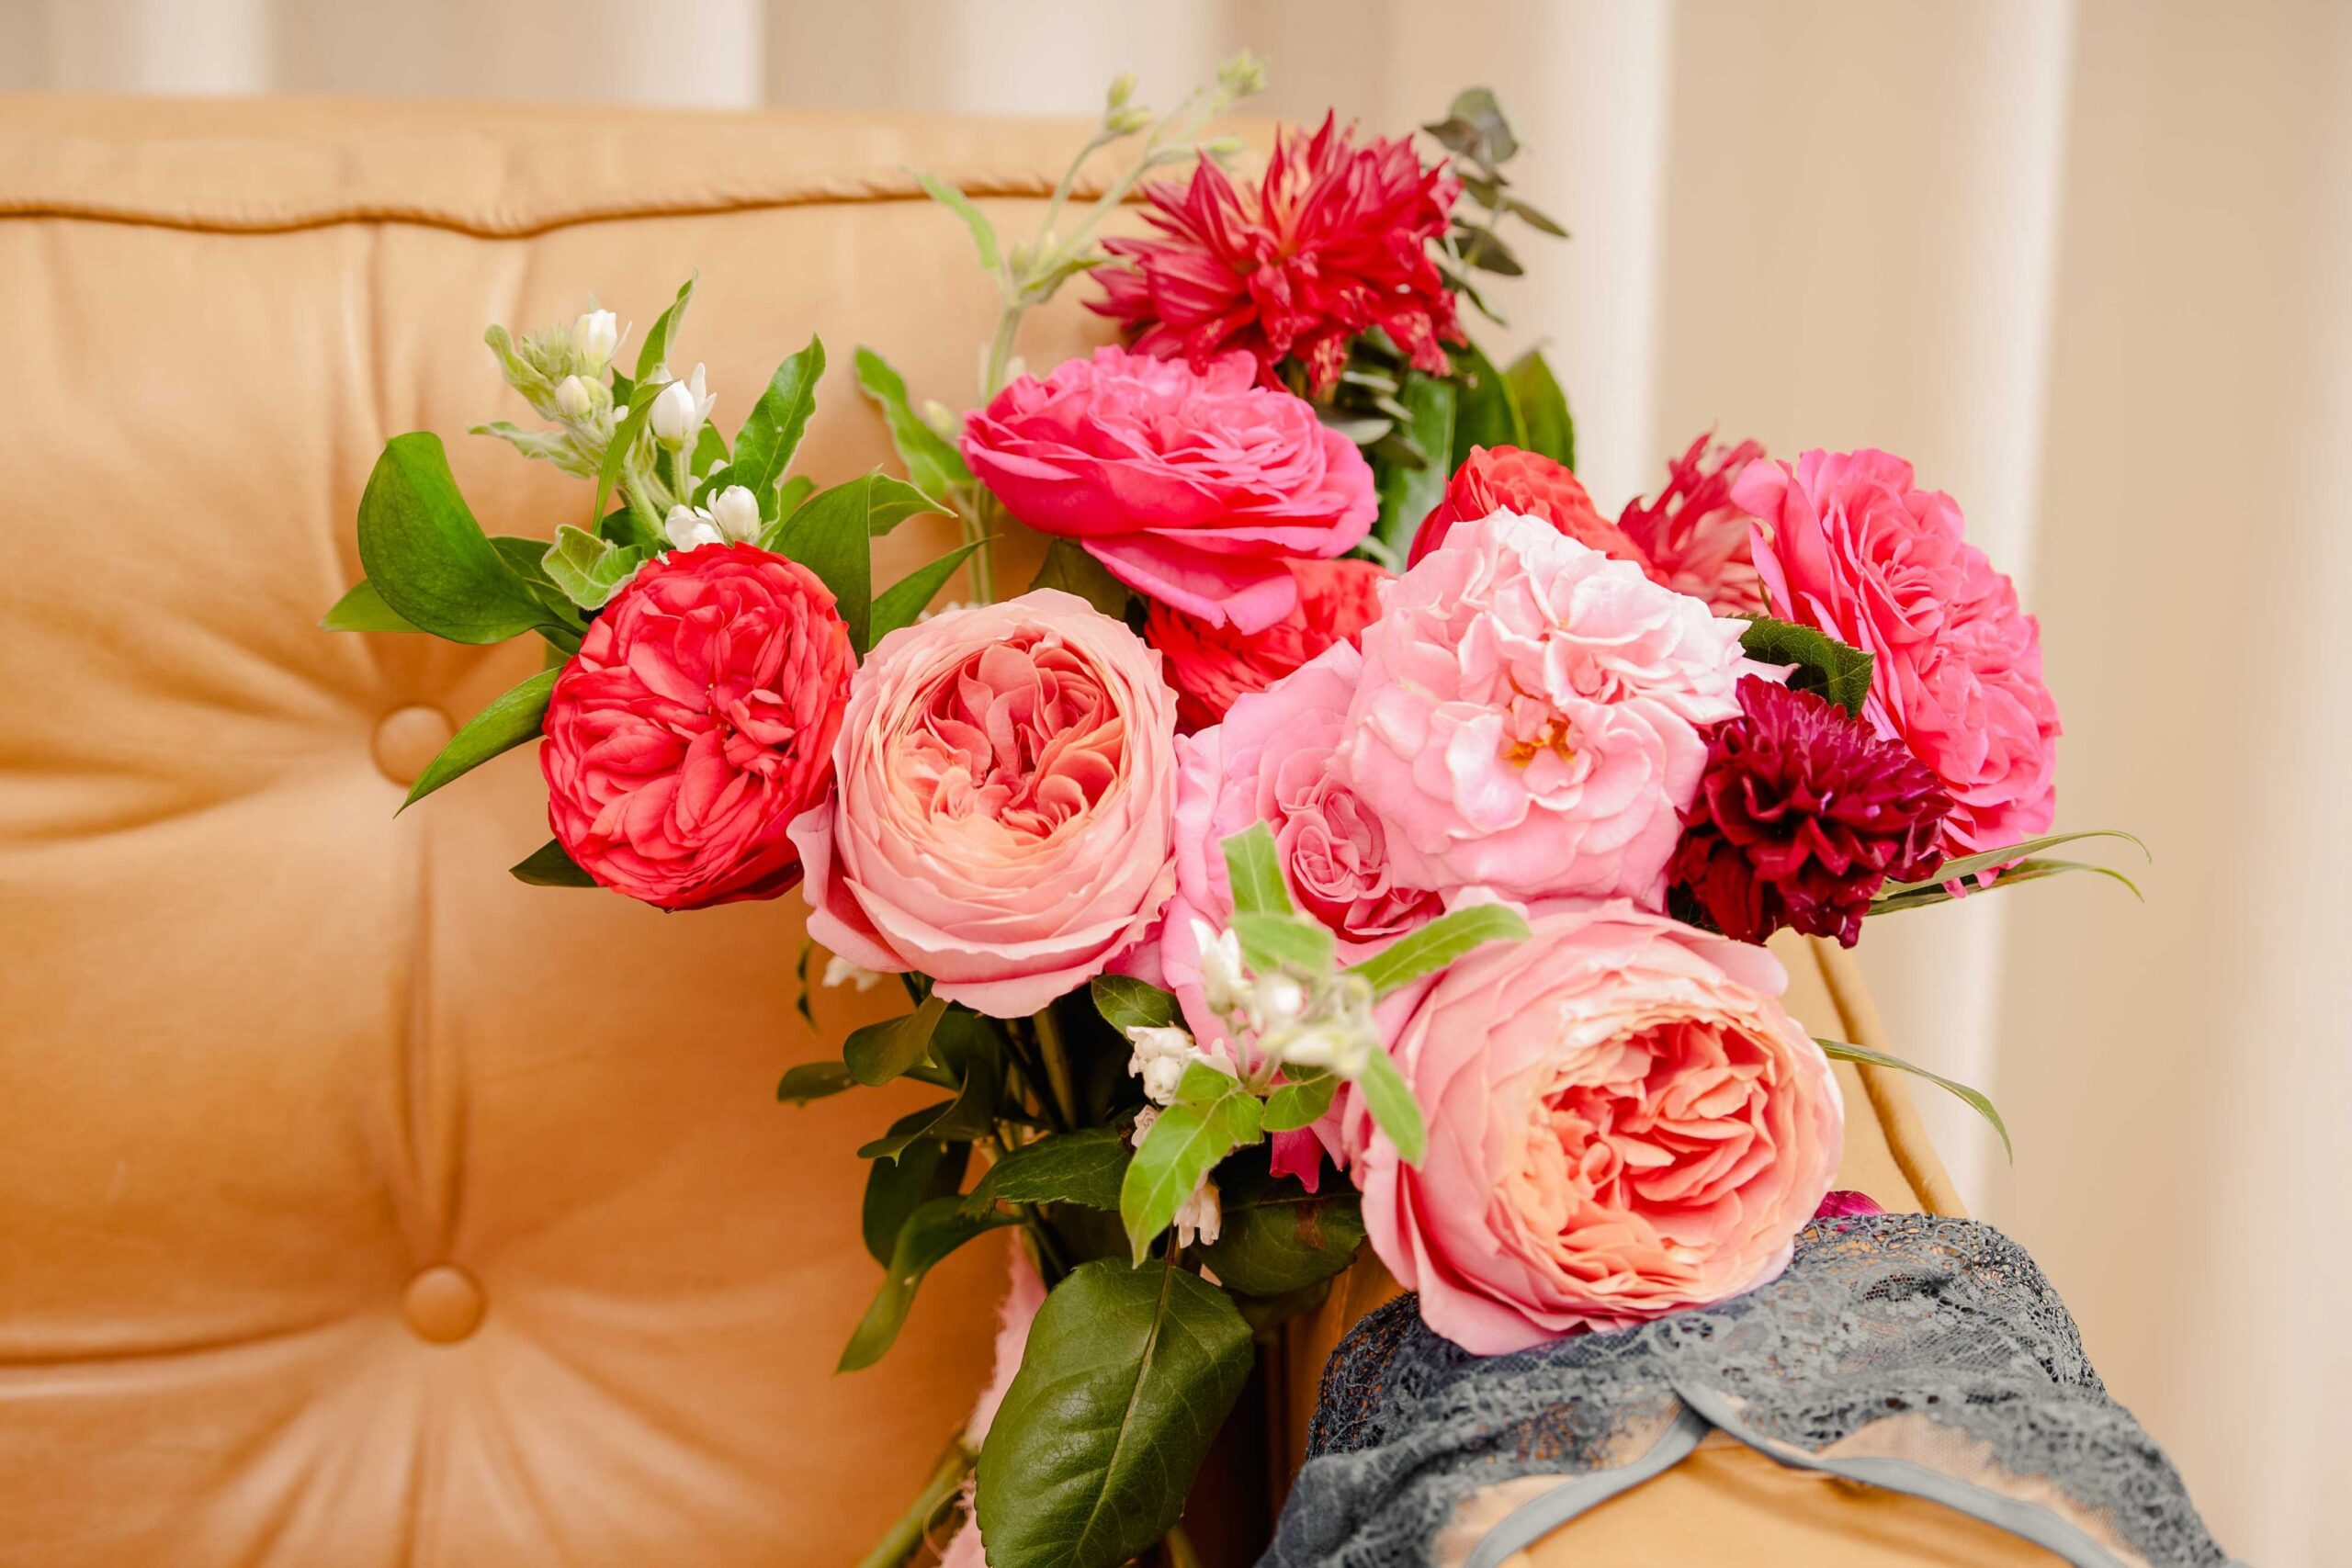 Pink and red roses and dahlias on a couch